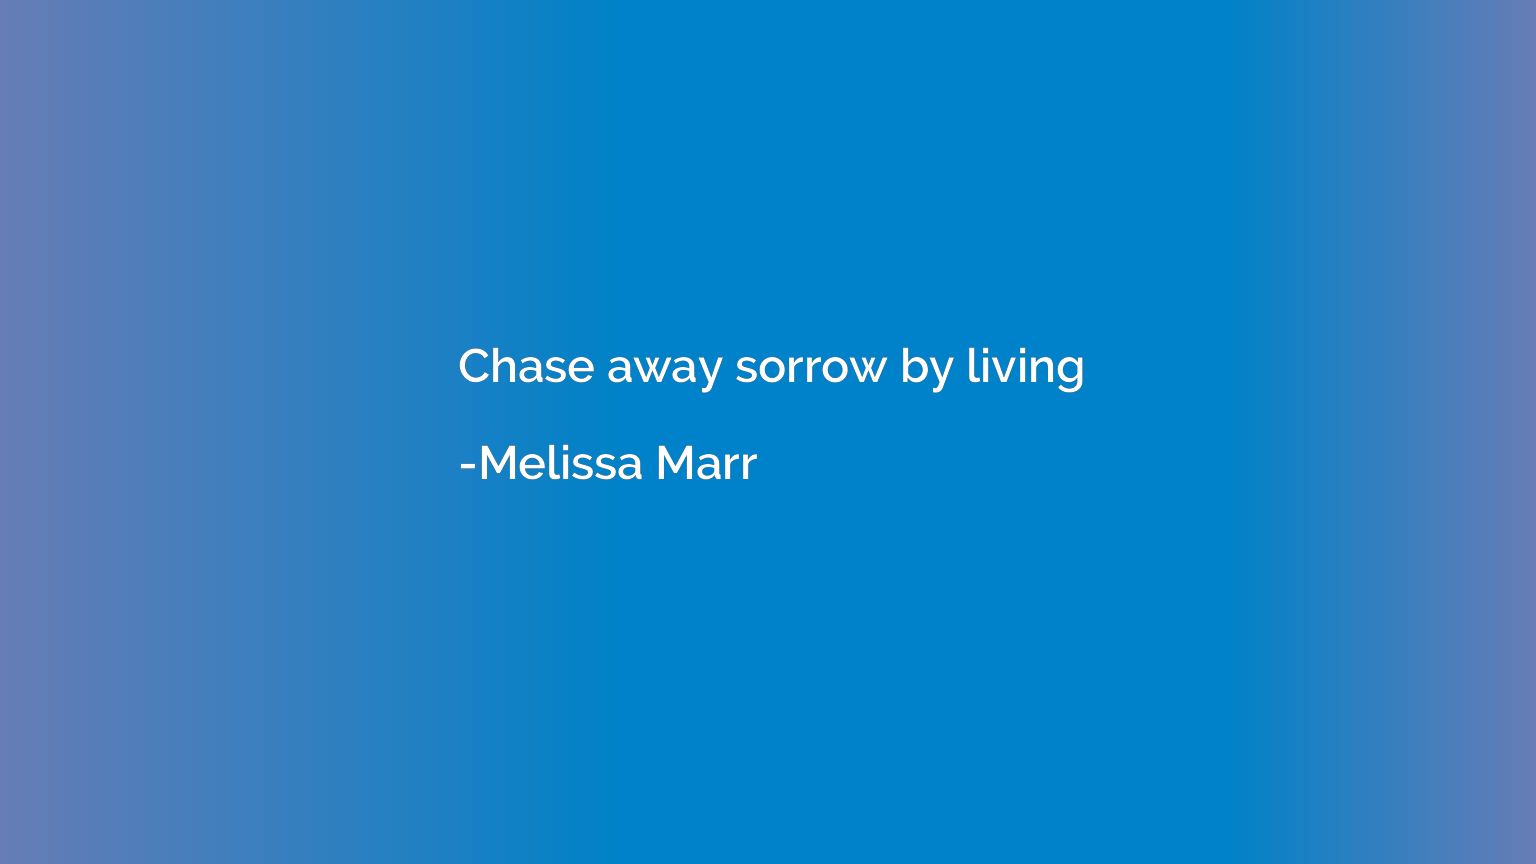 Chase away sorrow by living